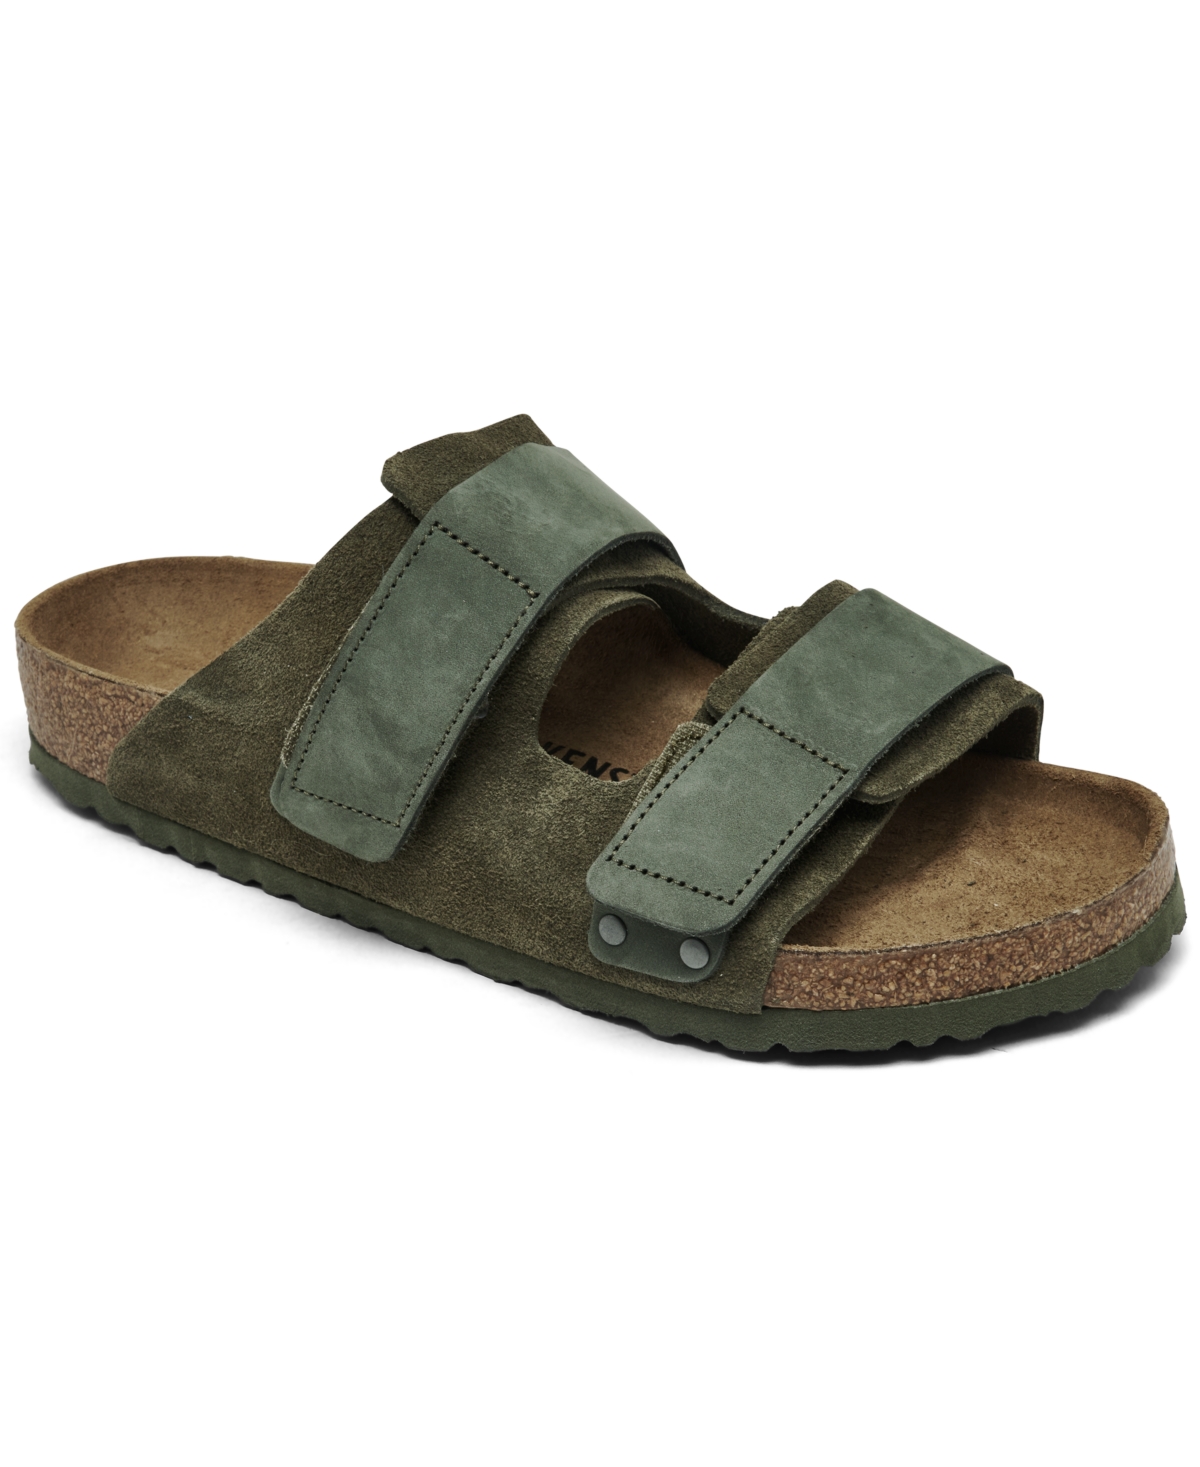 Men's Uji Nubuck Suede Leather Two-Strap Slip-On Sandals from Finish Line - Beige